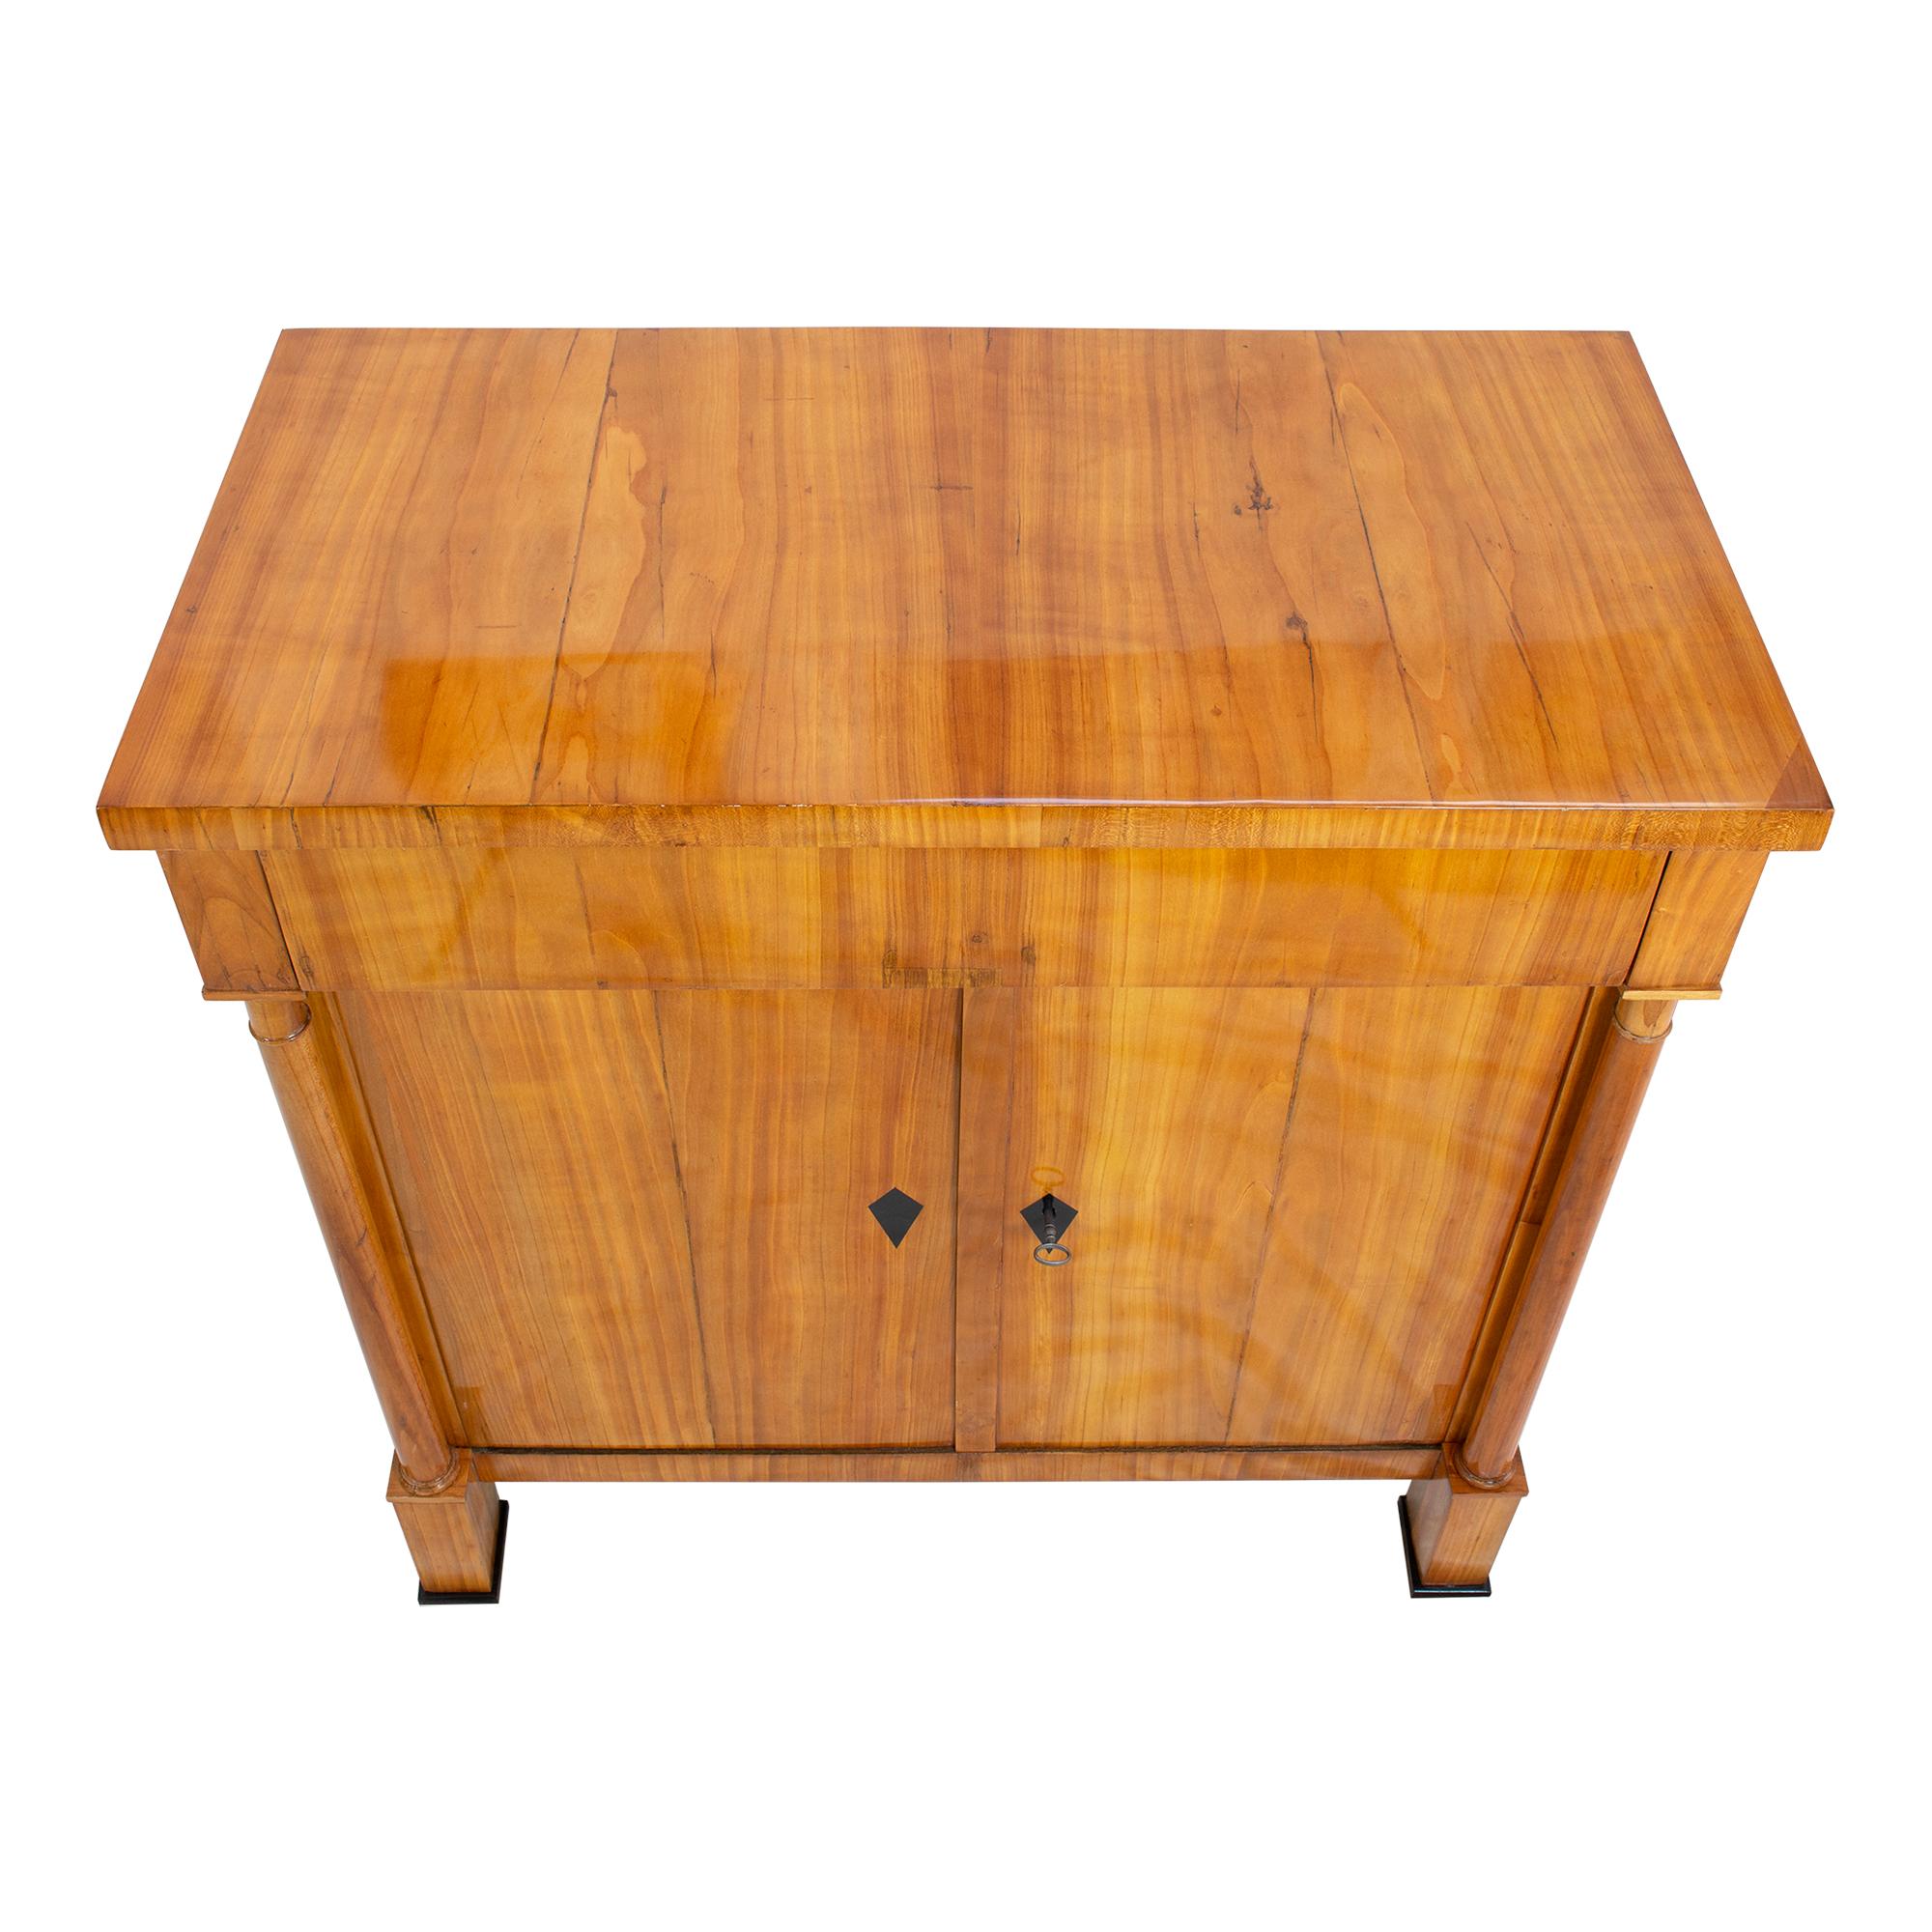 Polished Early 19th Century Biedermeier Cherrywood Half Cabinet / Commode For Sale